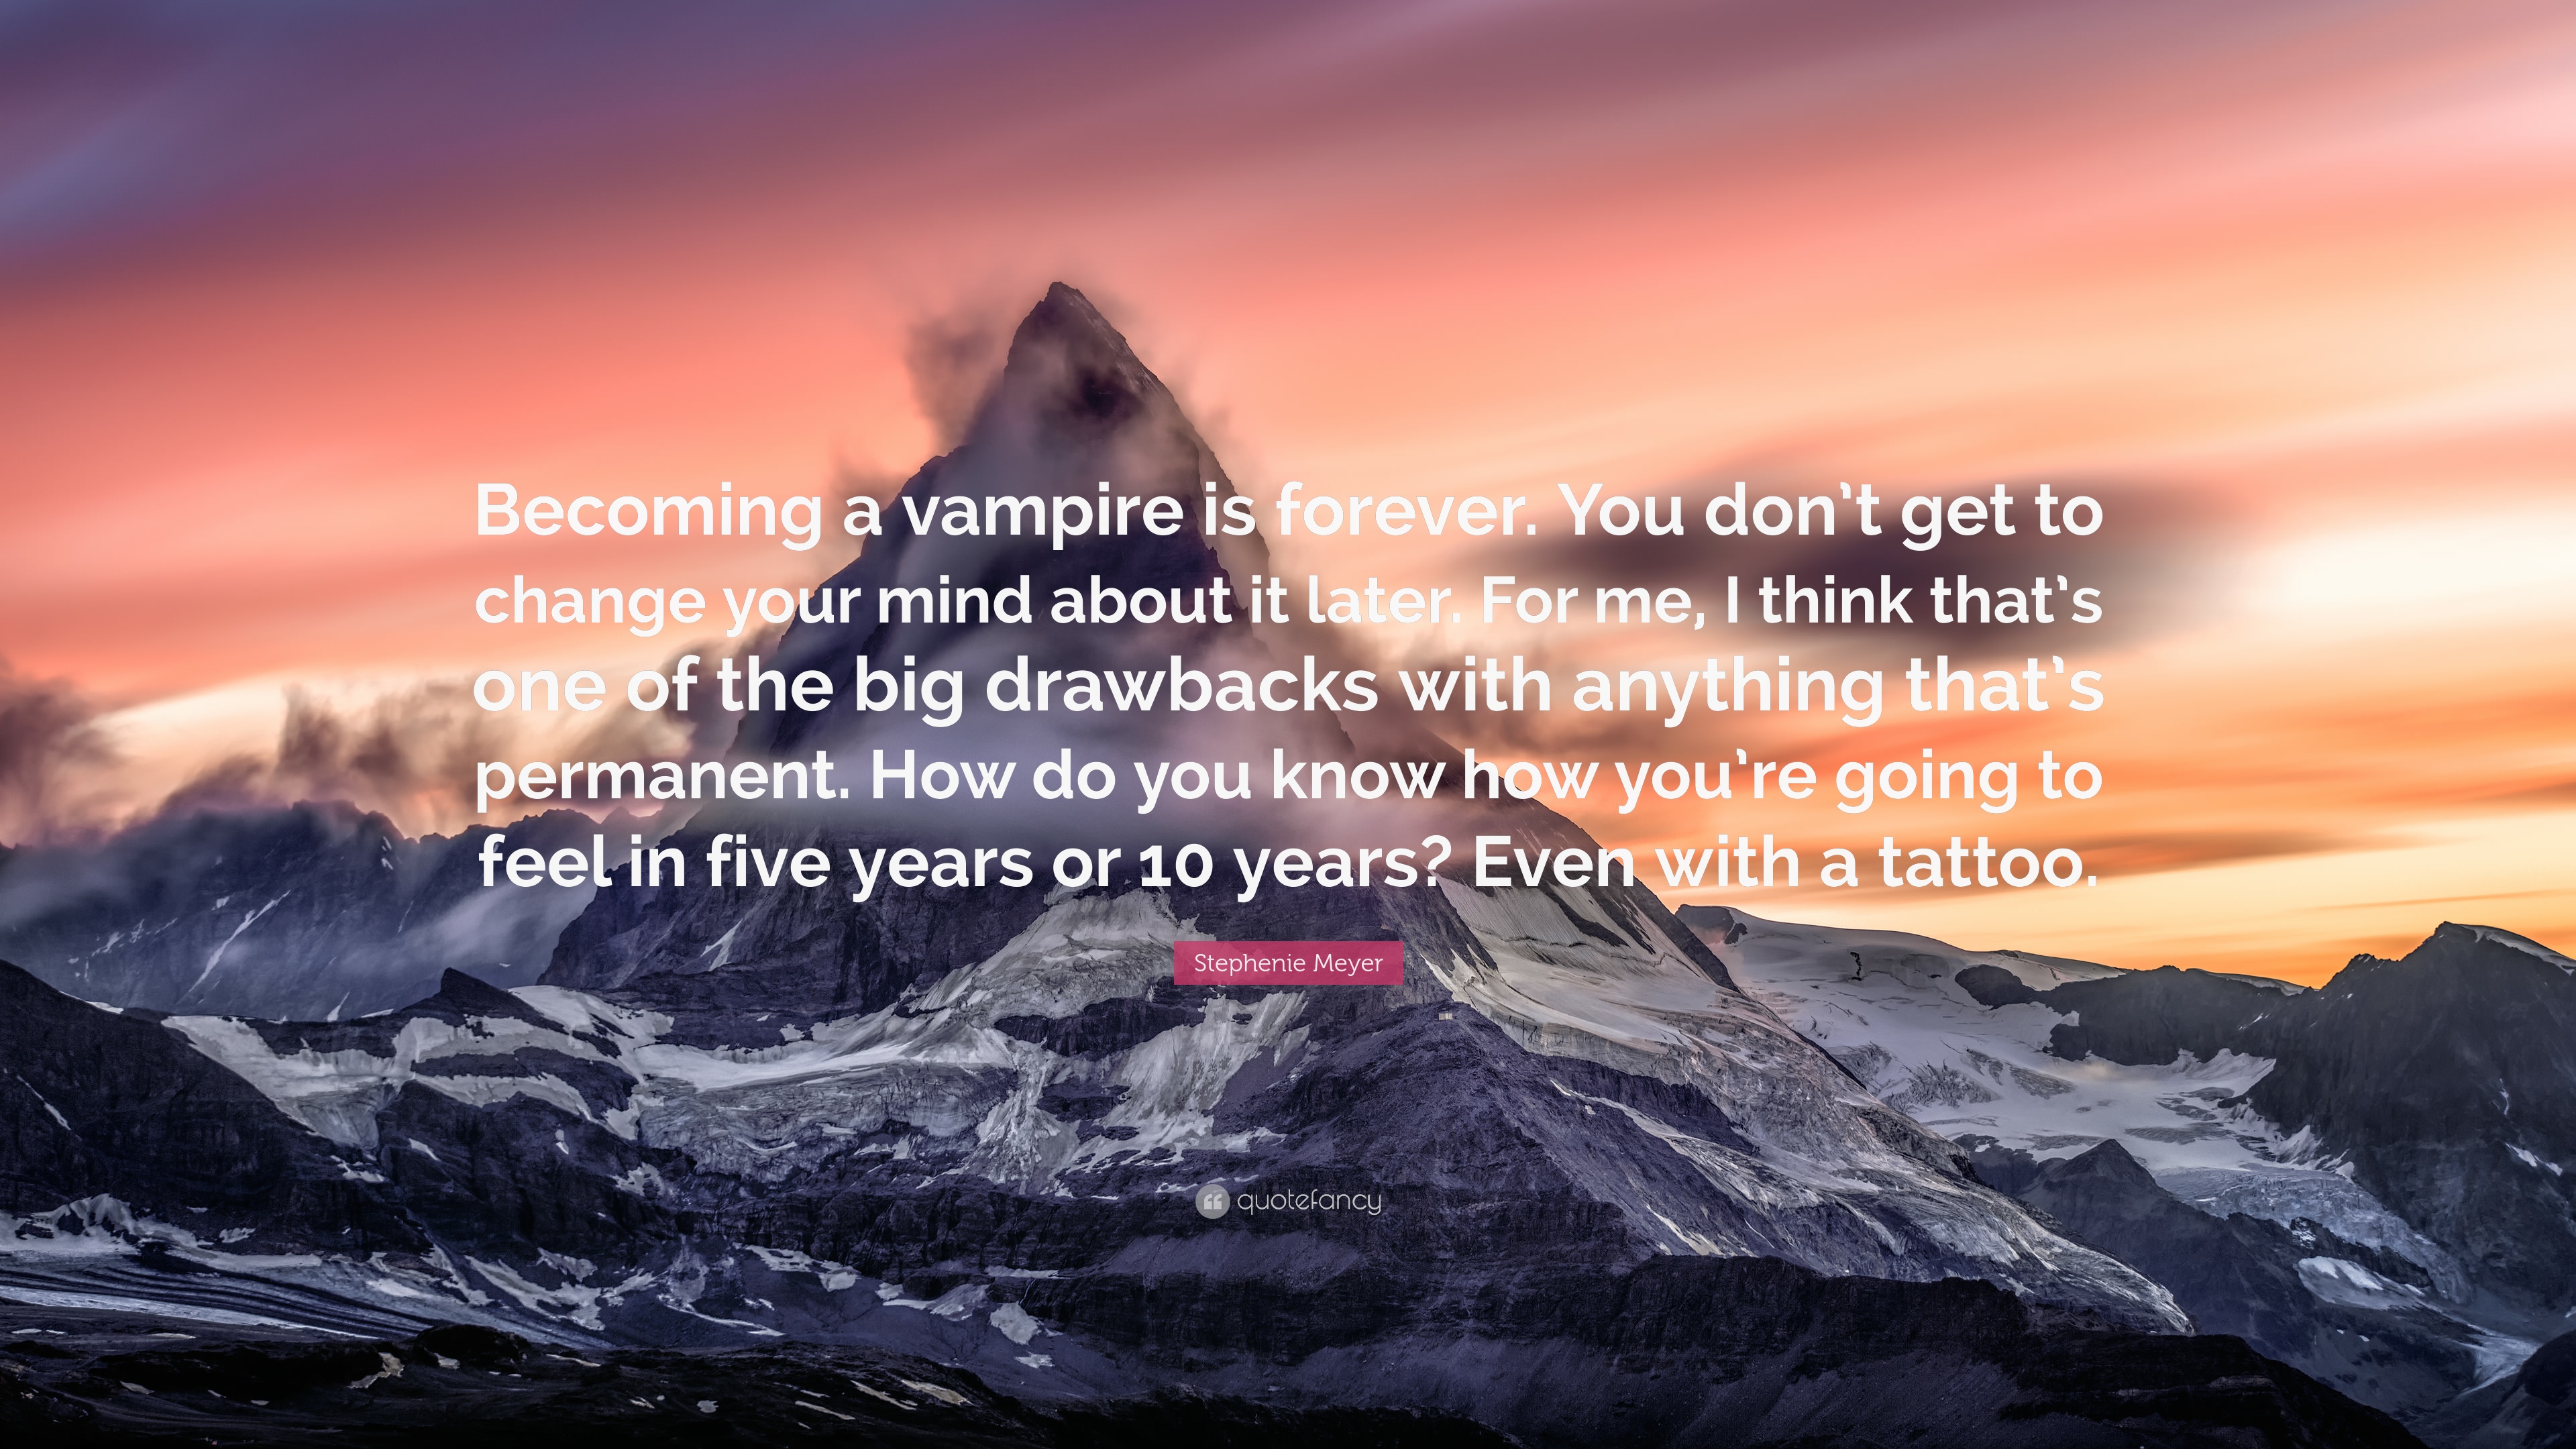 Stephenie Meyer Quote: “Becoming a vampire is forever. You don't get